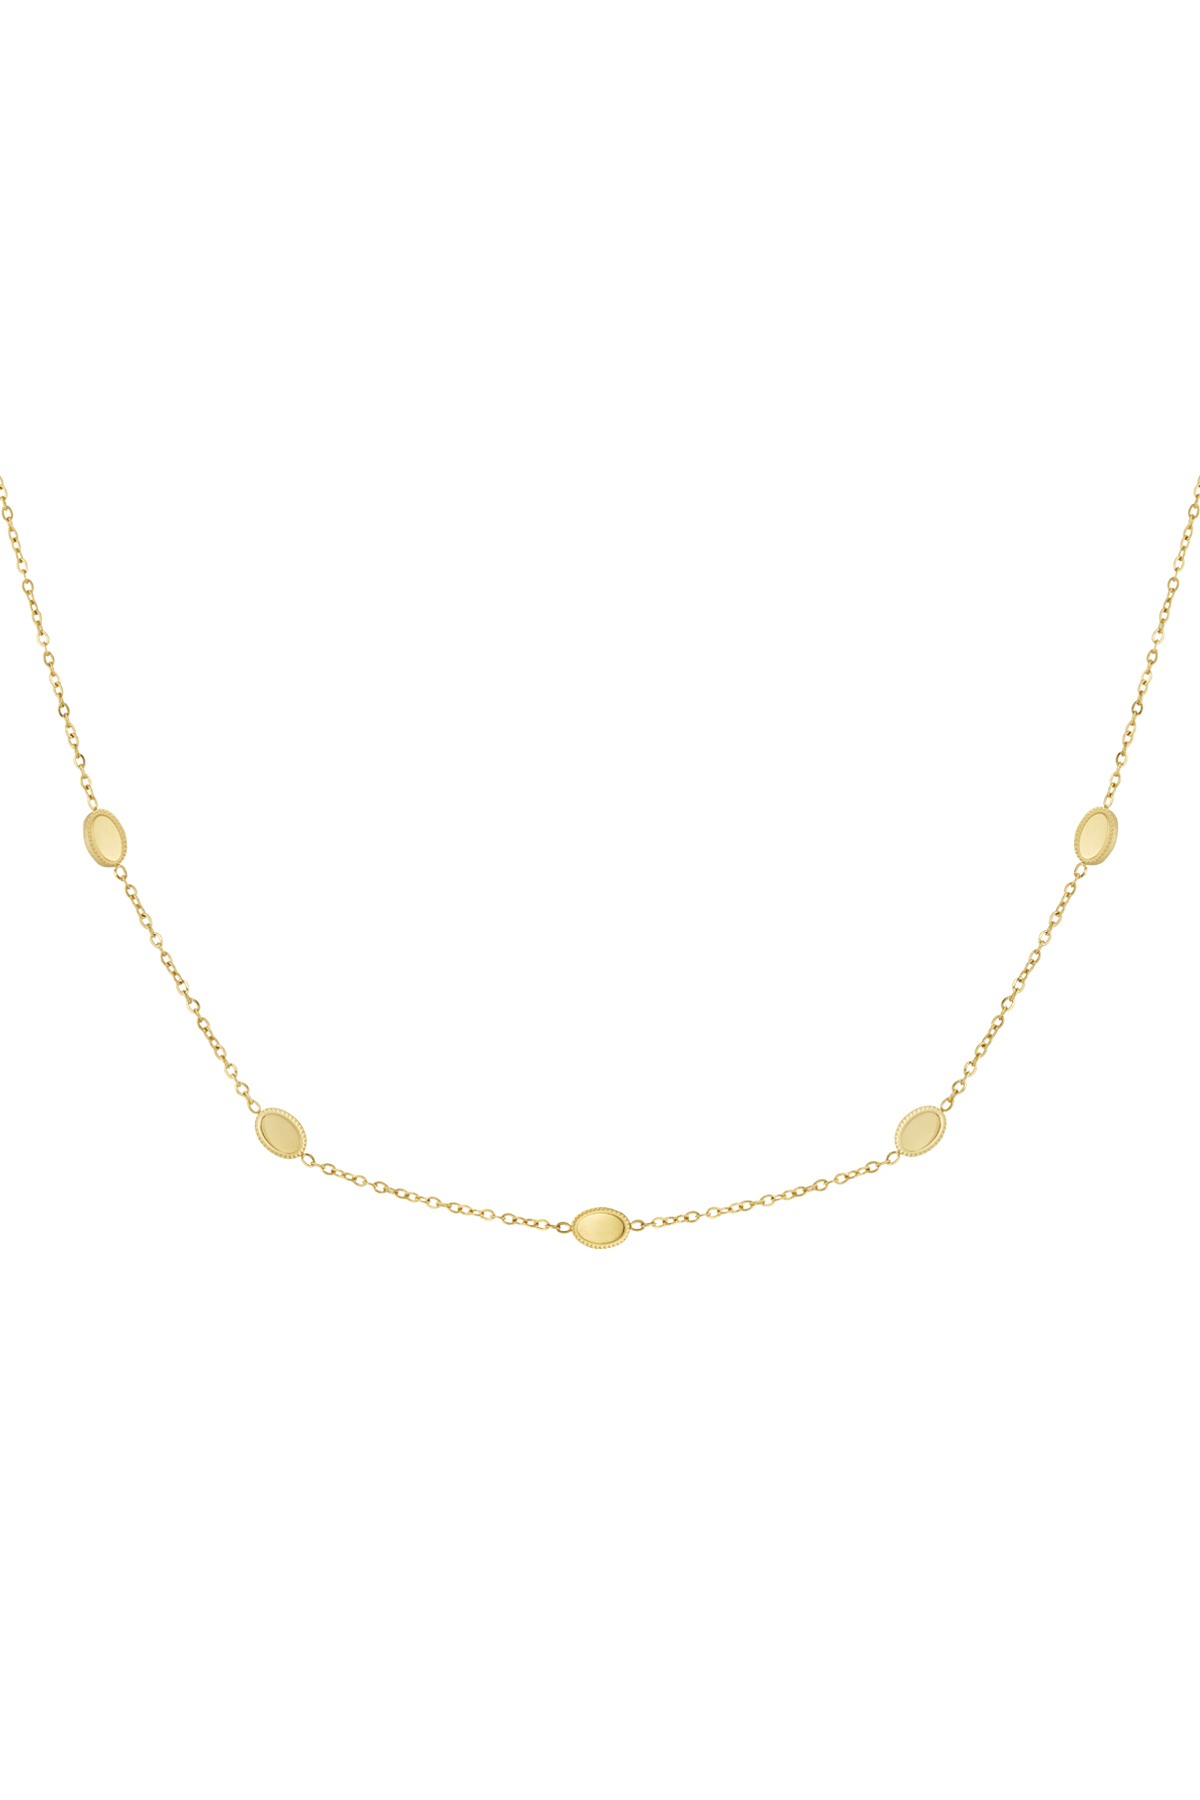 Necklace with 5 stones - gold 